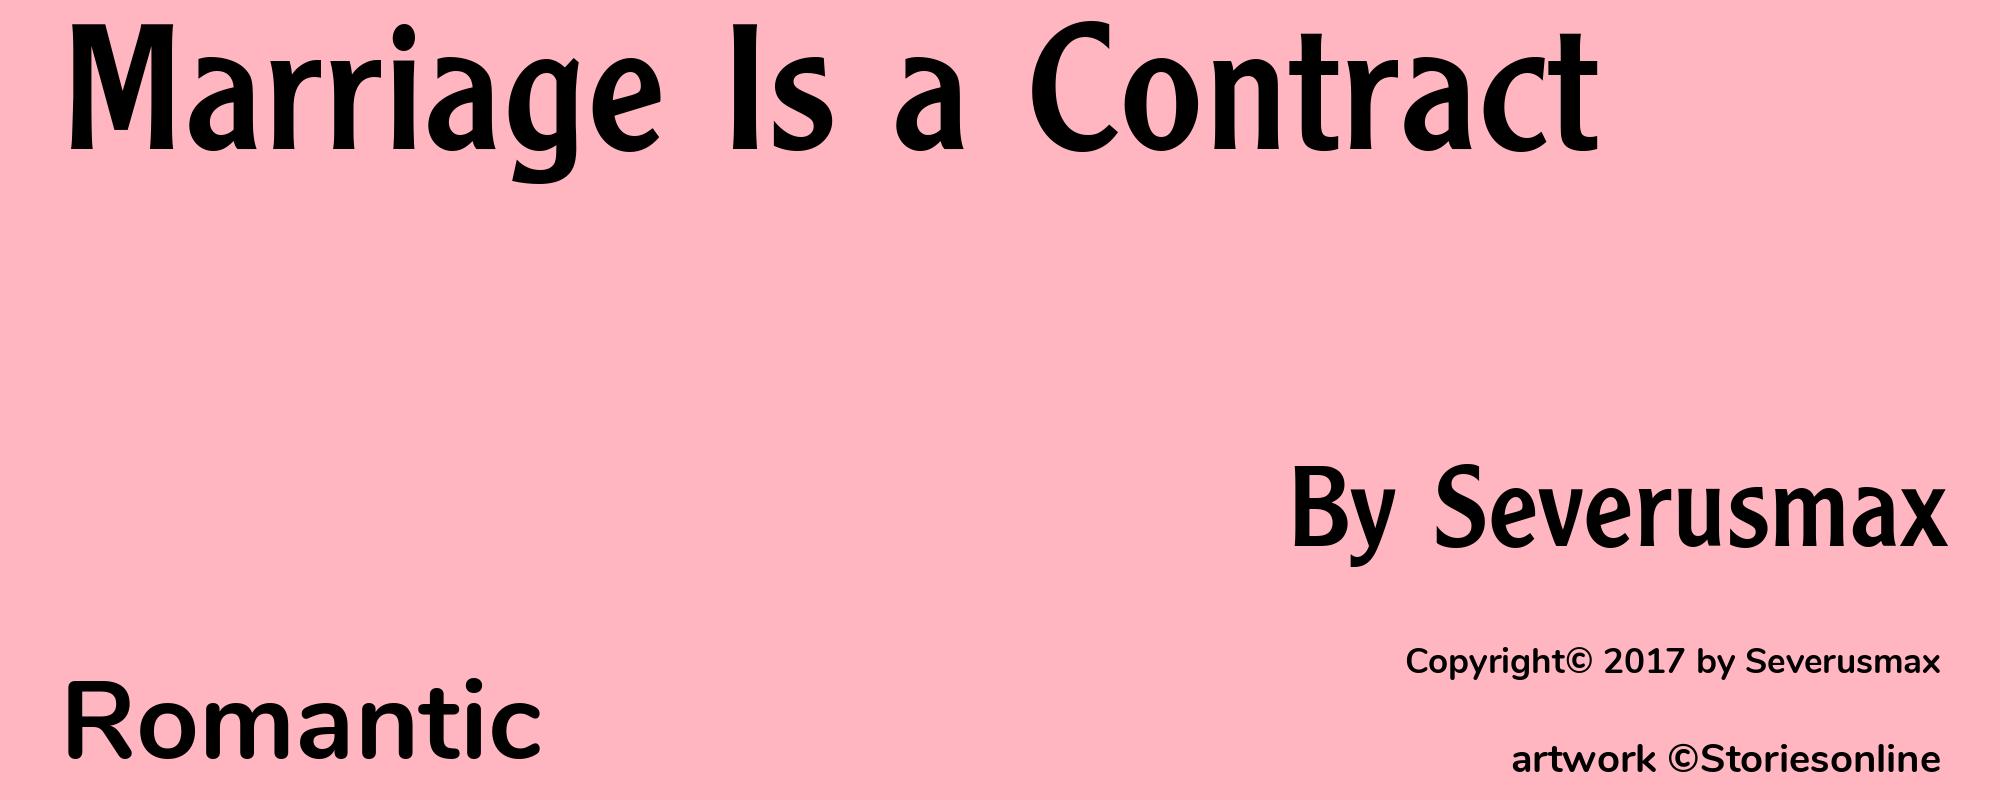 Marriage Is a Contract - Cover